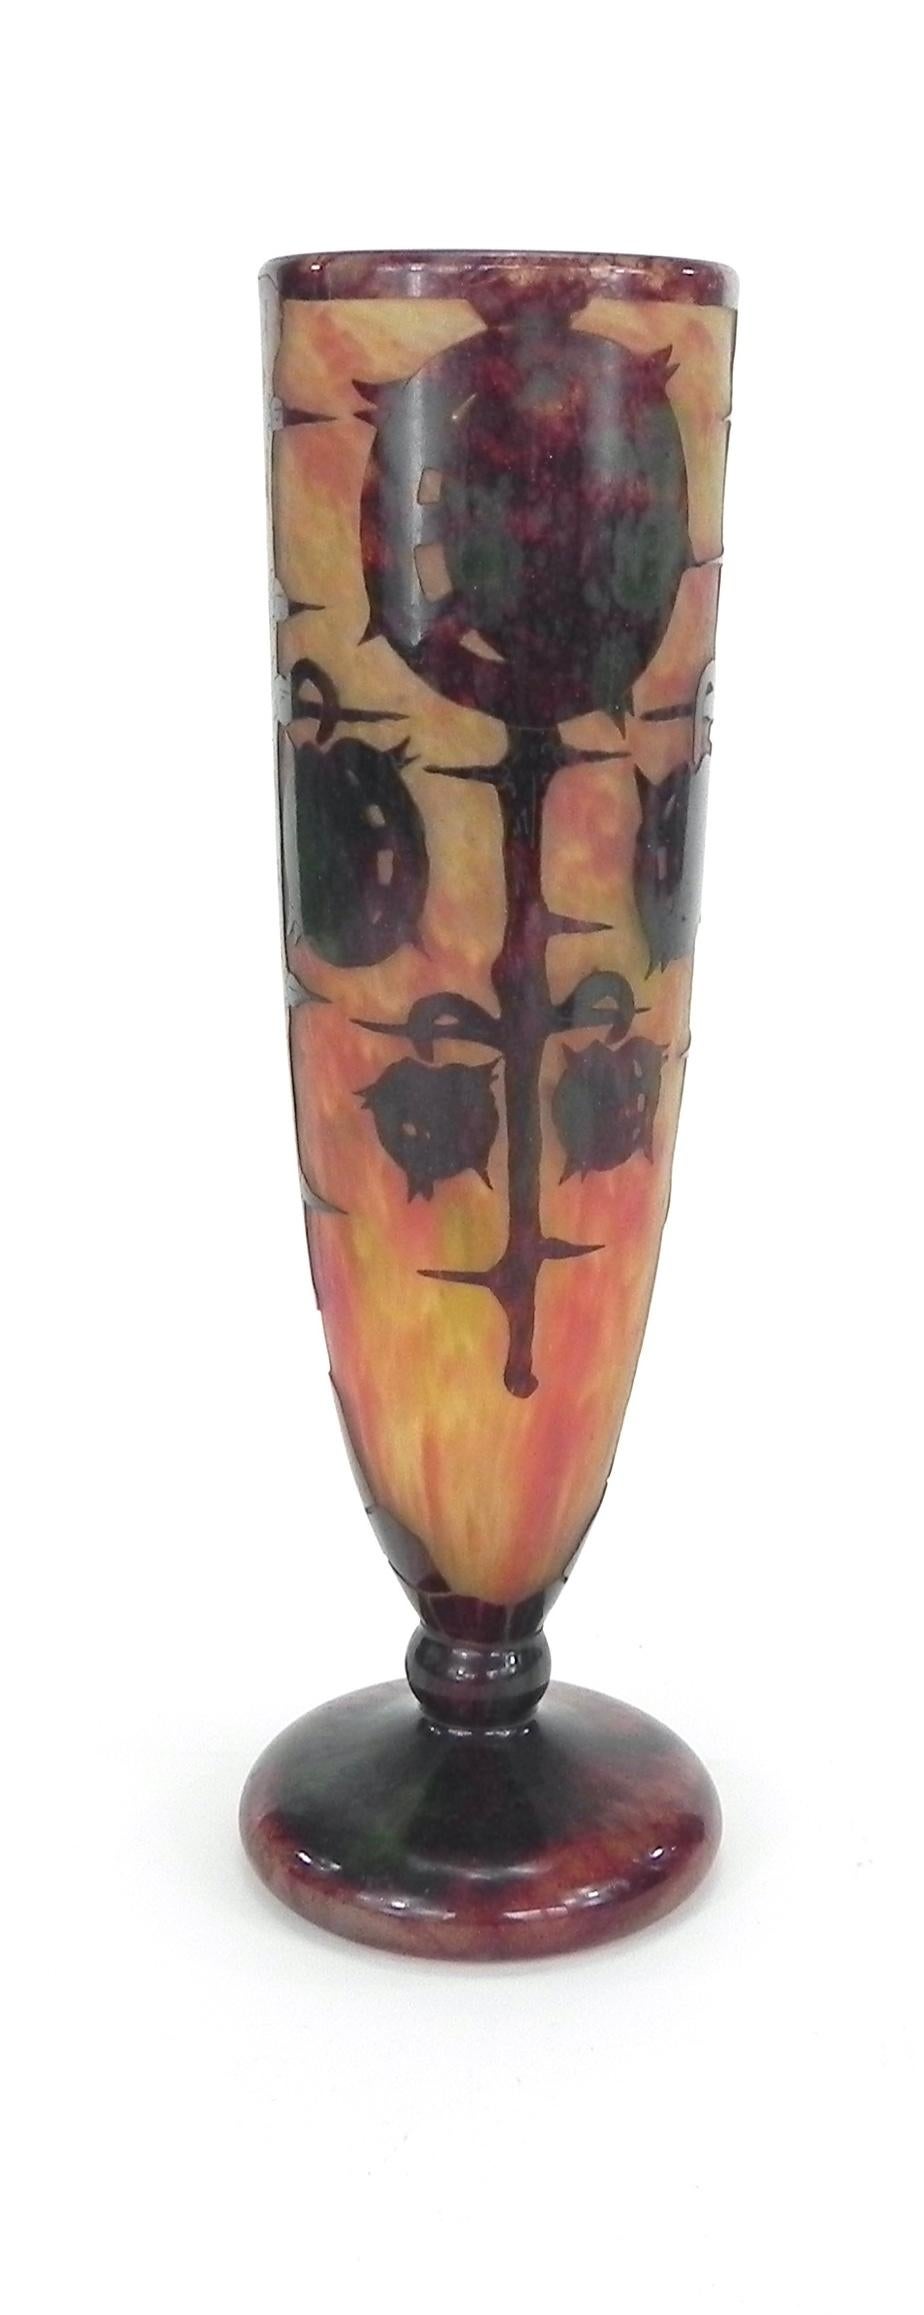 A tall narrow pedestal “Le Verre Francais” cameo art glass vase (ca. 1922-25) decorated with chestnuts (marrons) by the master French glass designer Charles Schneider (1881-1953). This superbly crafted acid-etched flute-shaped vase done in the Art